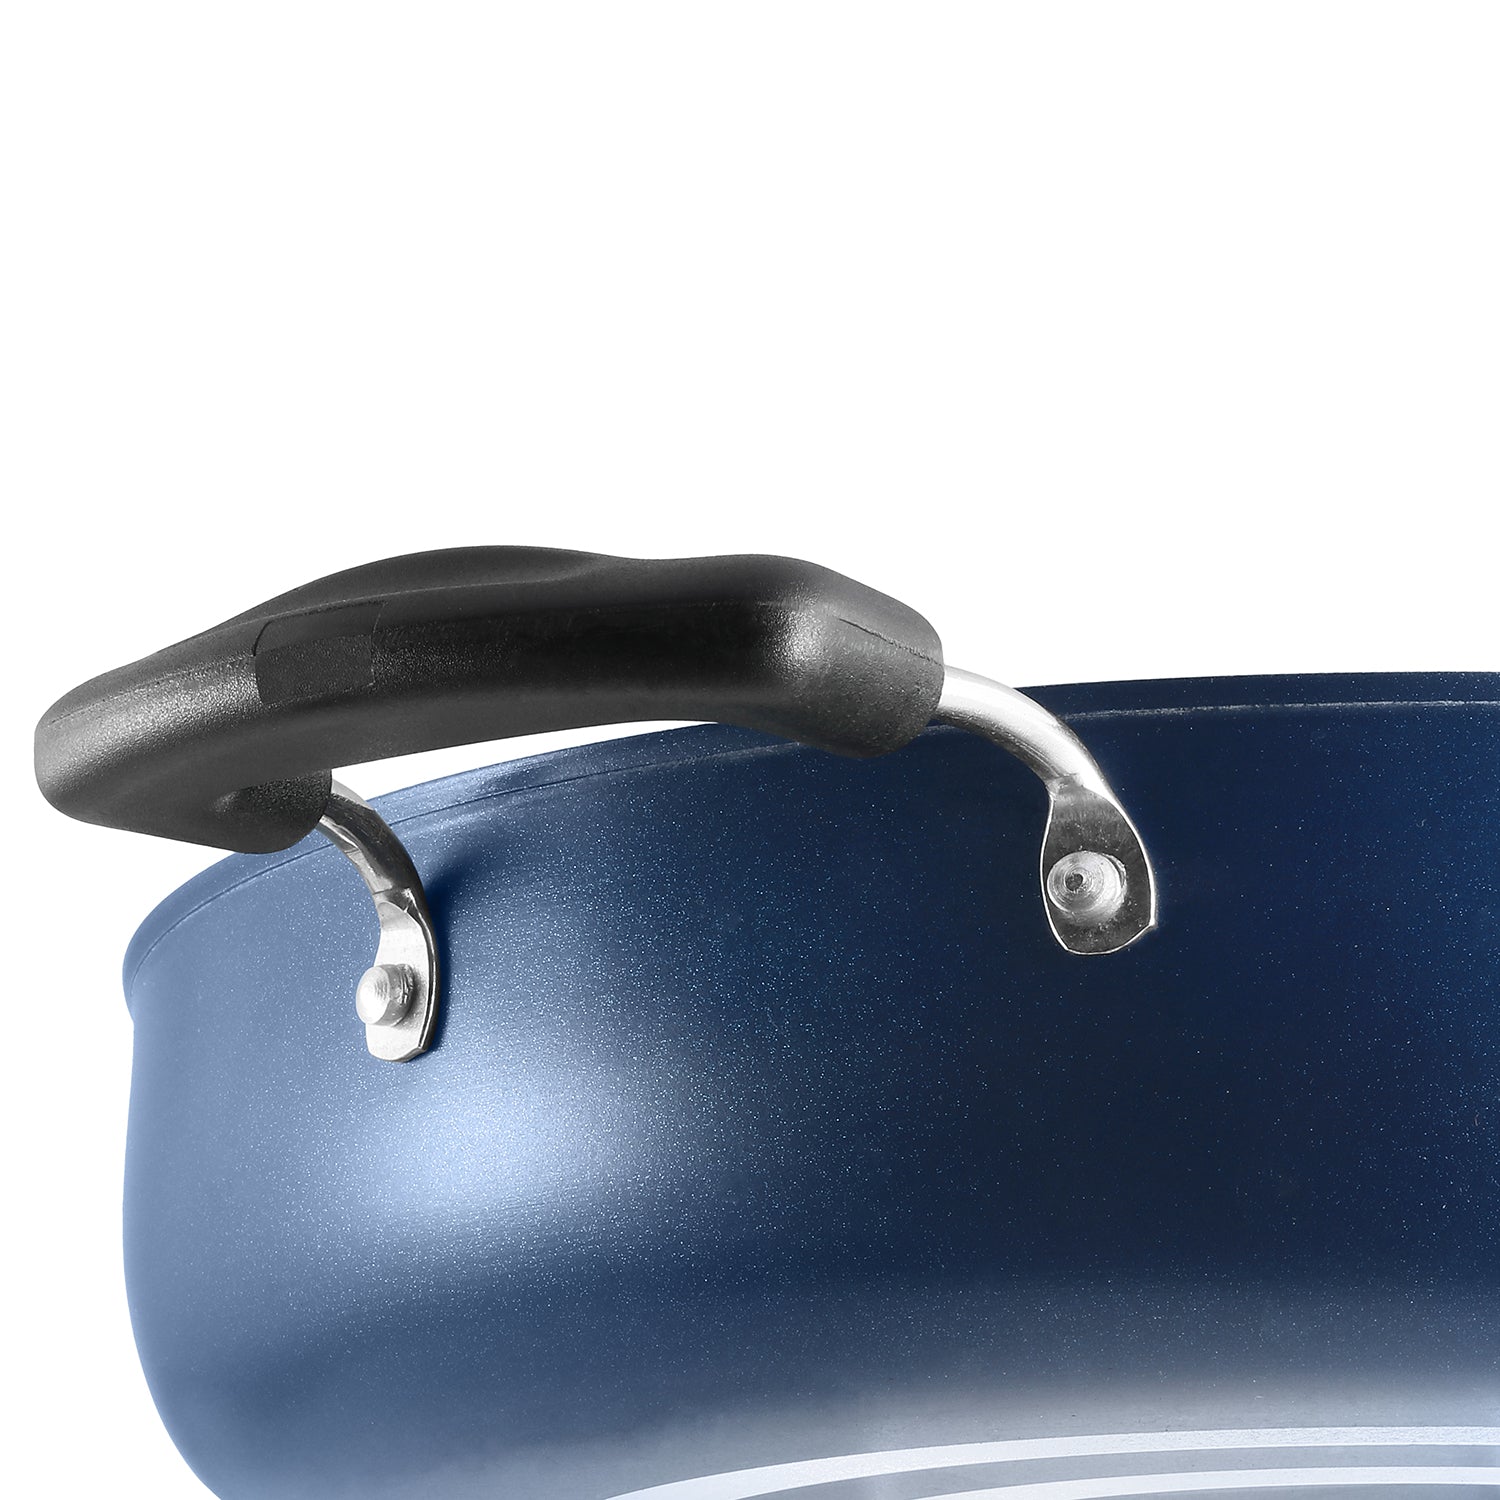 Sturdy Riveted Handle of Non Stick Deep Frypan